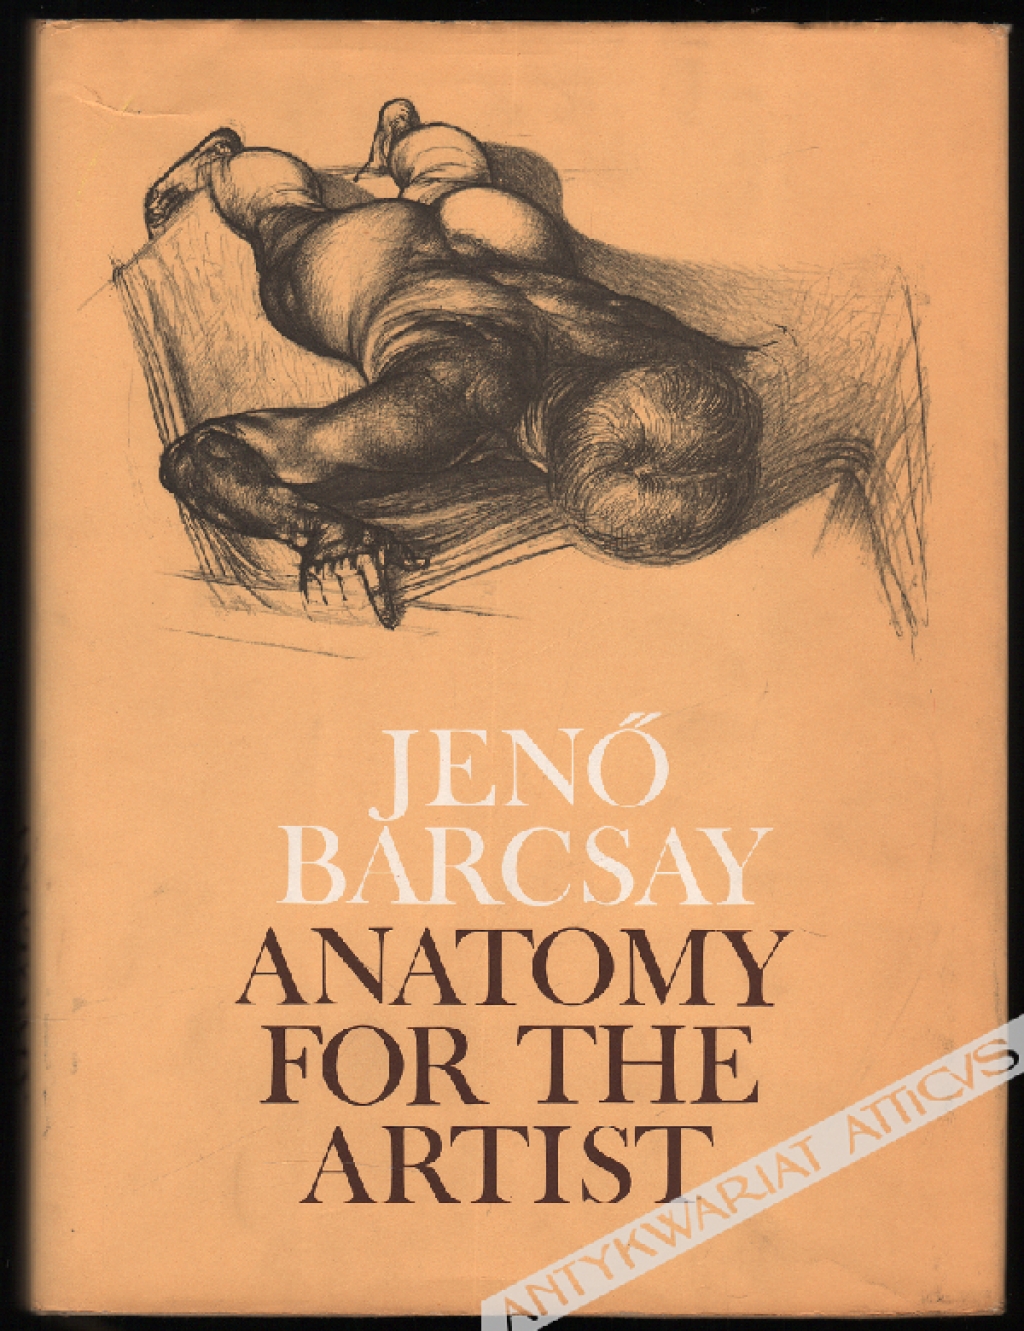 Anatomy for the artist